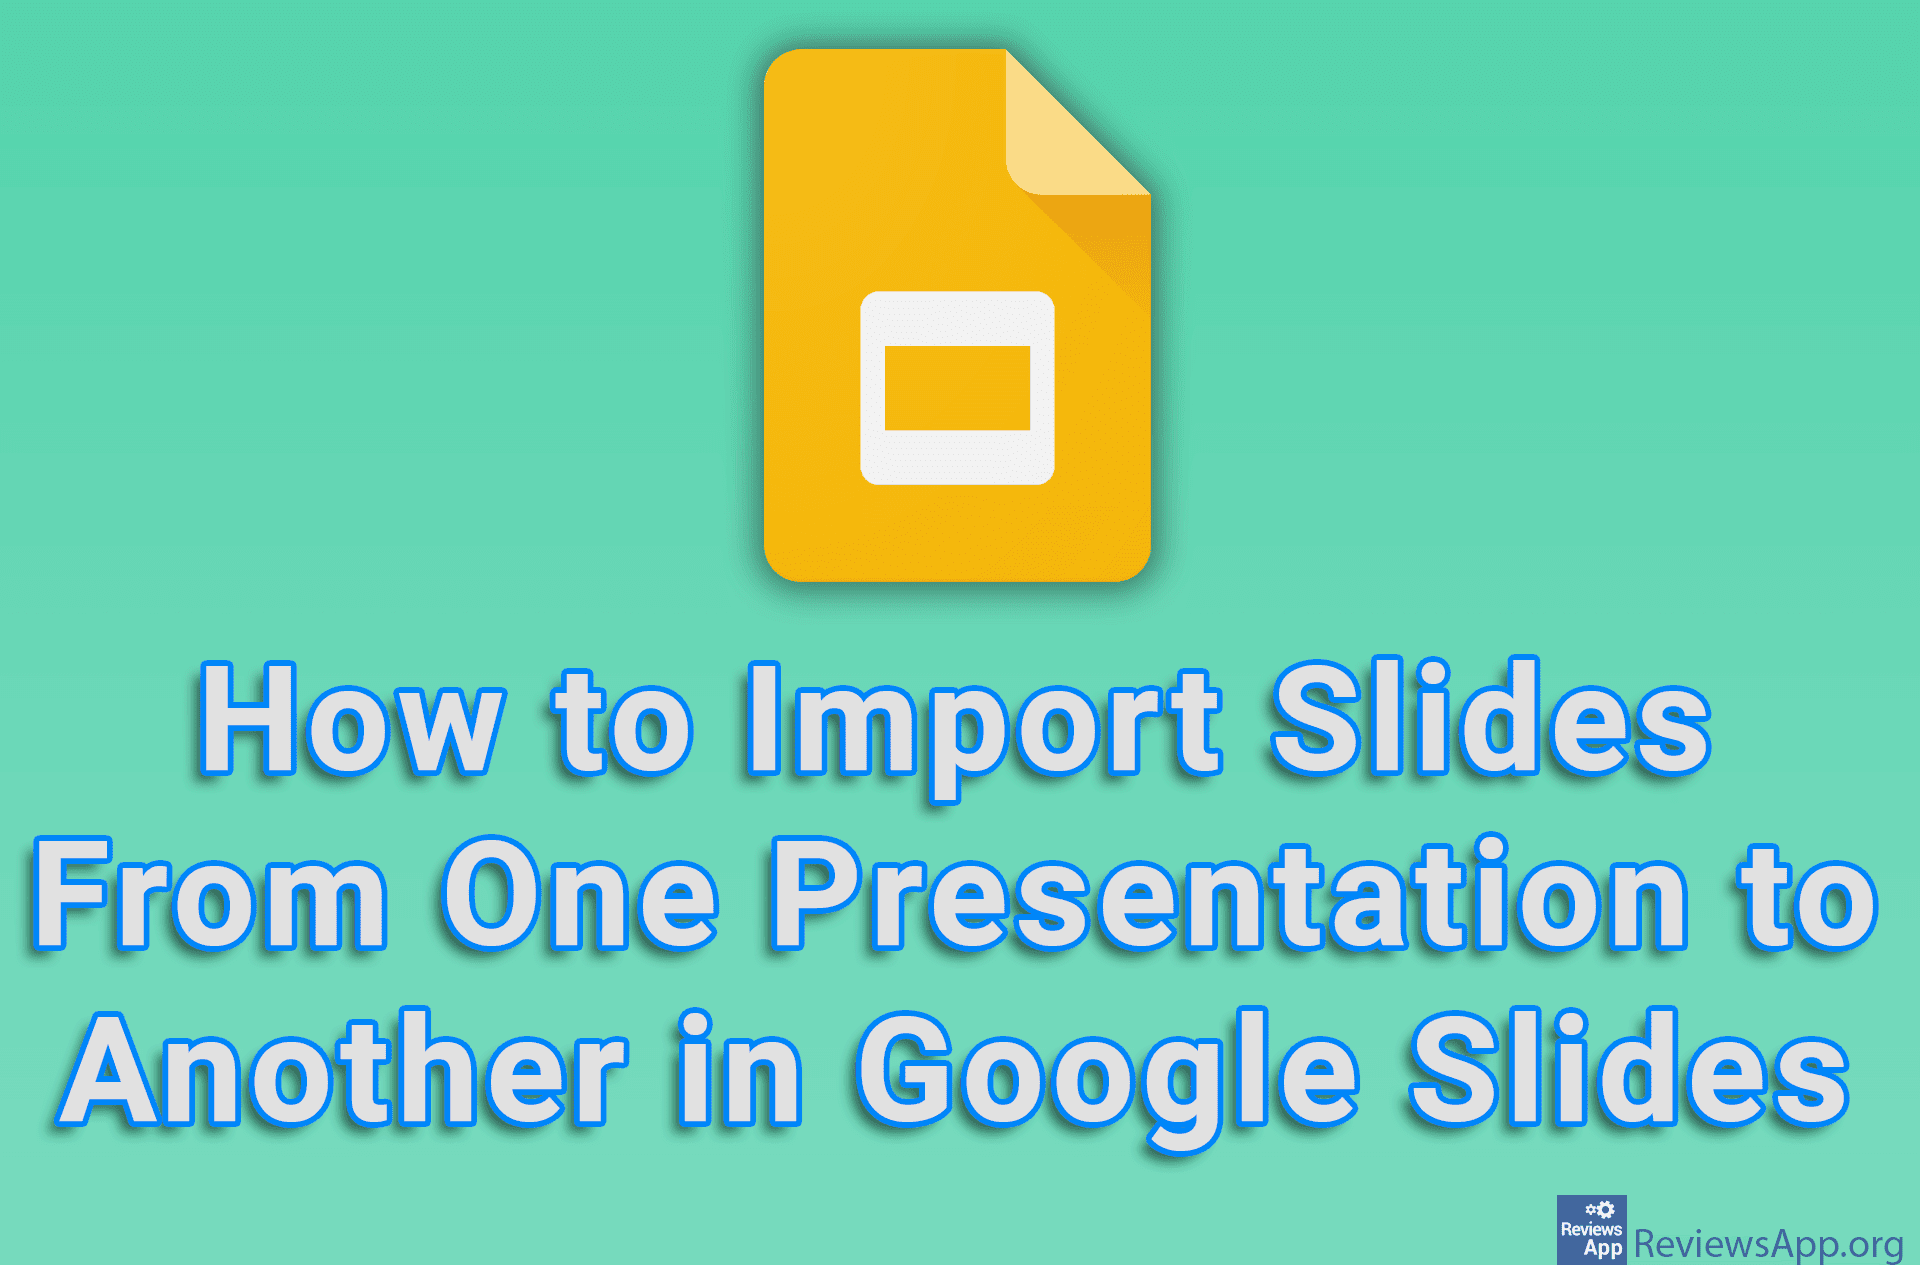 How to Import Slides From One Presentation to Another in Google Slides